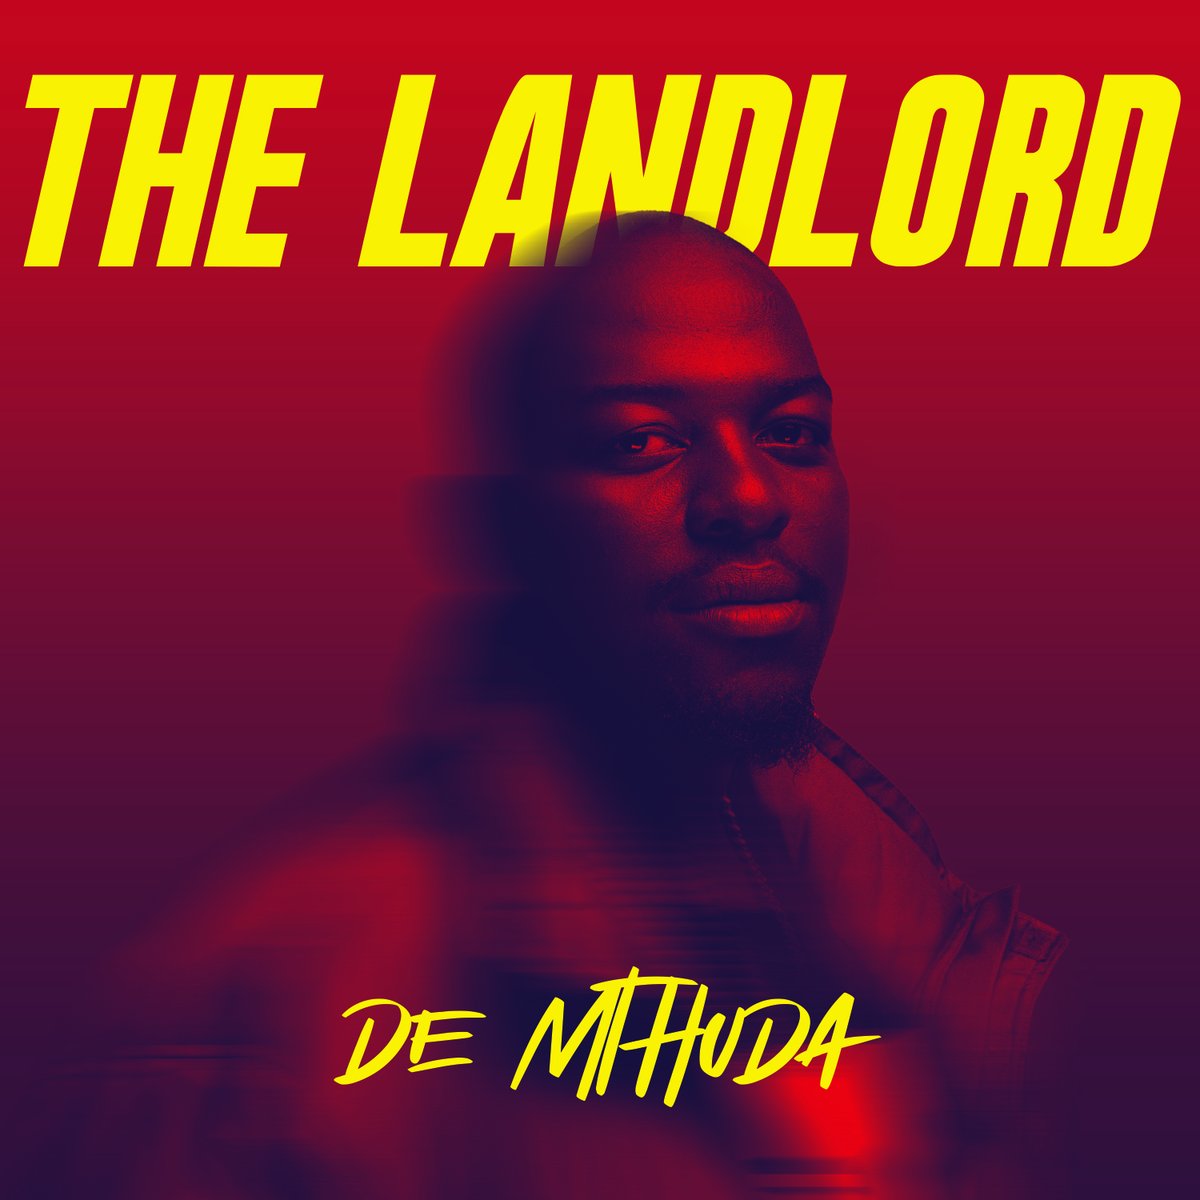 Amapiano hitmaker @DeMthudaSA returns with his third album #TheLandlord 🙌 Give it a listen 👉 dzr.fm/TheLandlord #DeMthudaTheLandlord